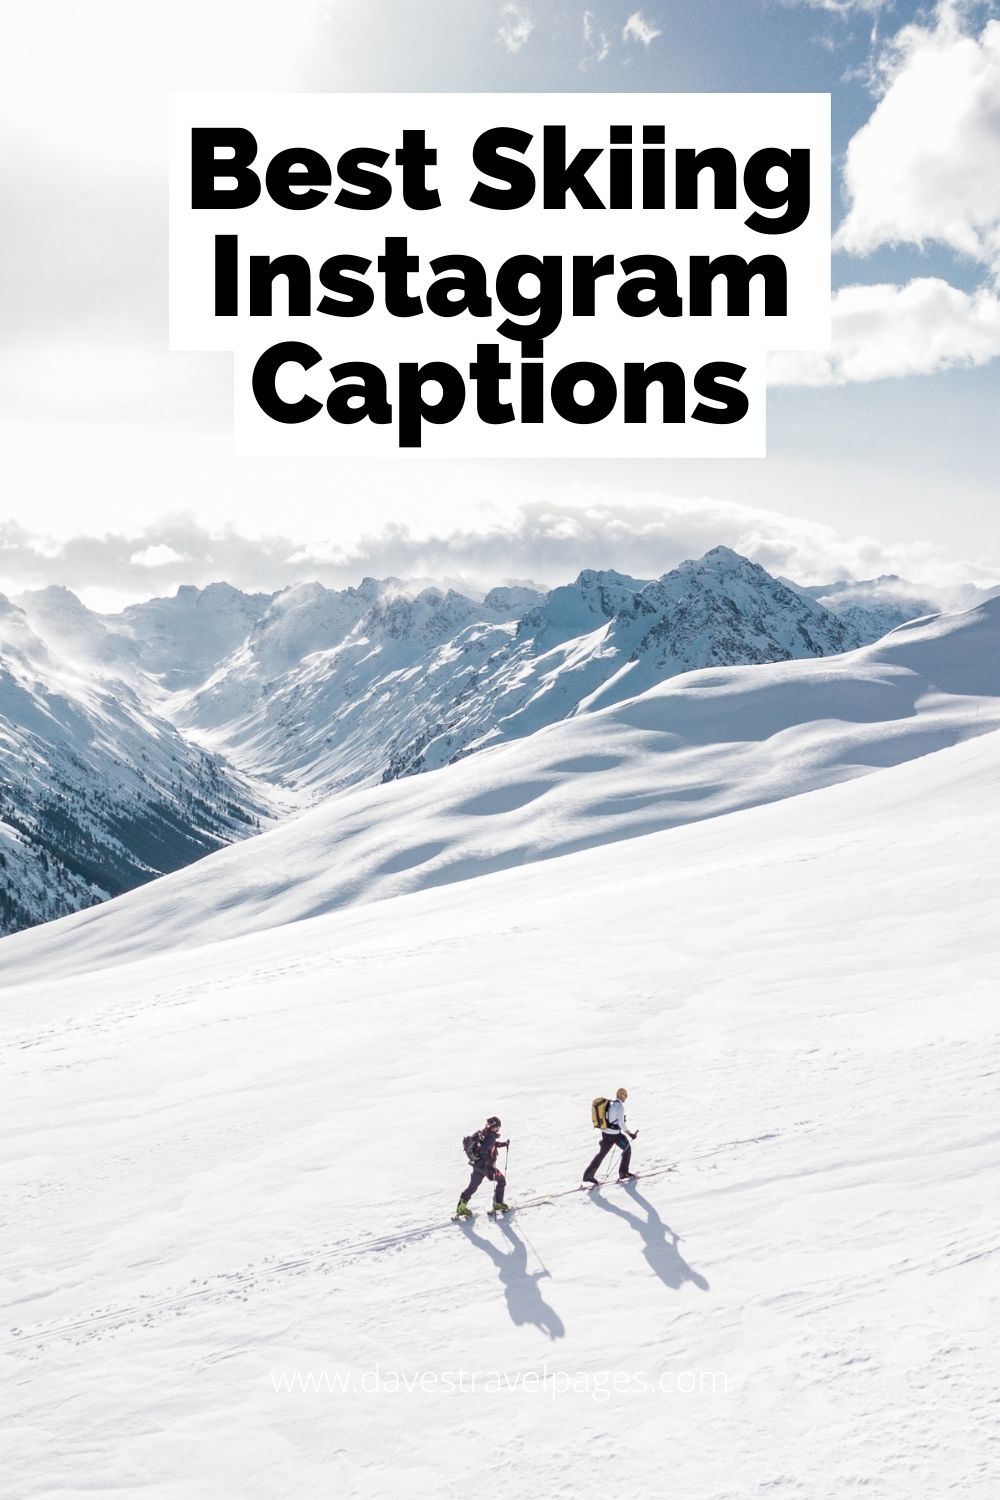 Instagram Captions About Skiing